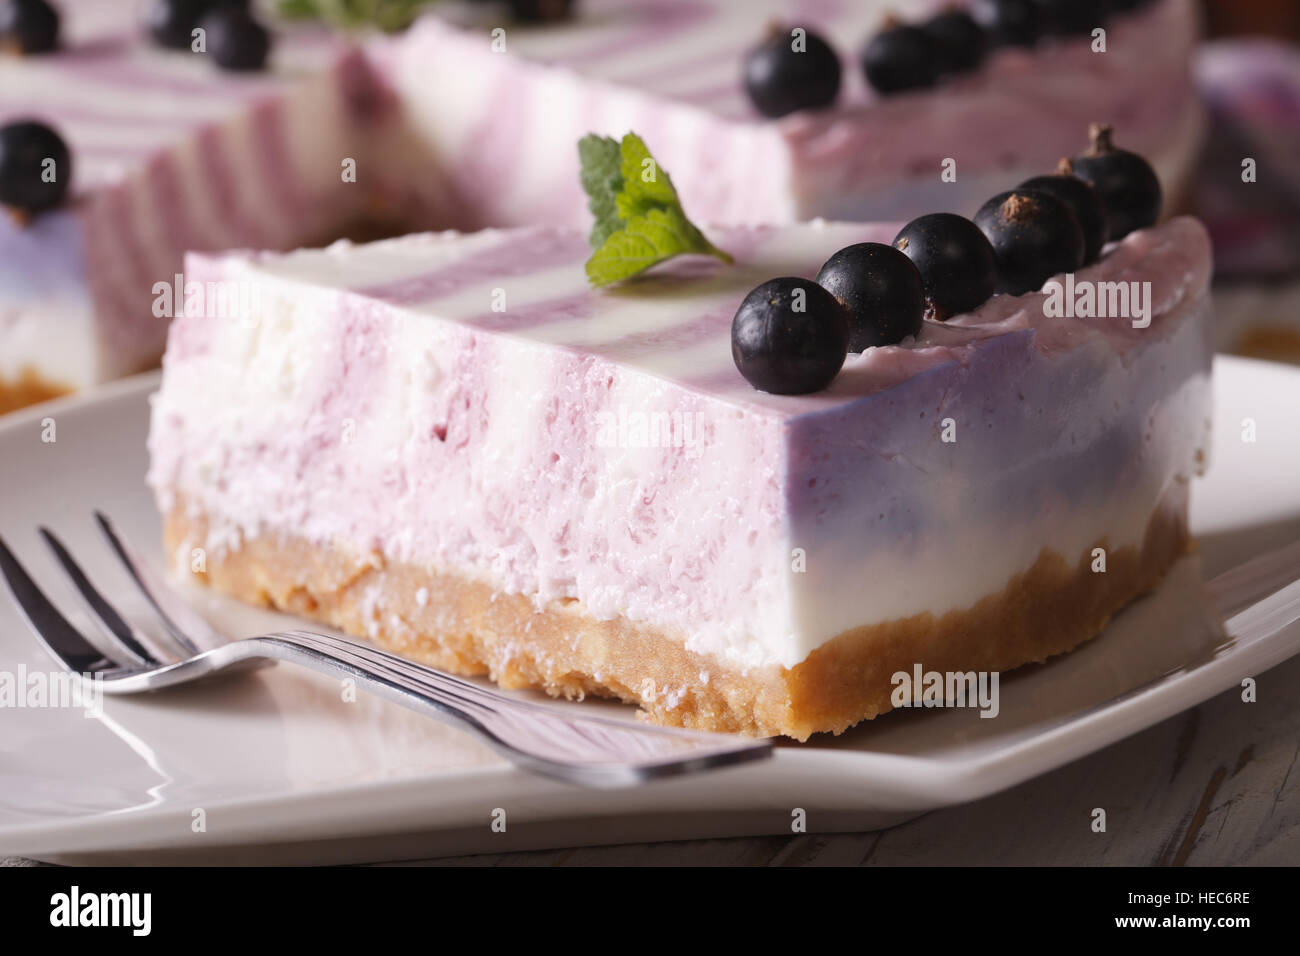 A piece of cheese cake with currants close-up on a plate. horizontal Stock Photo